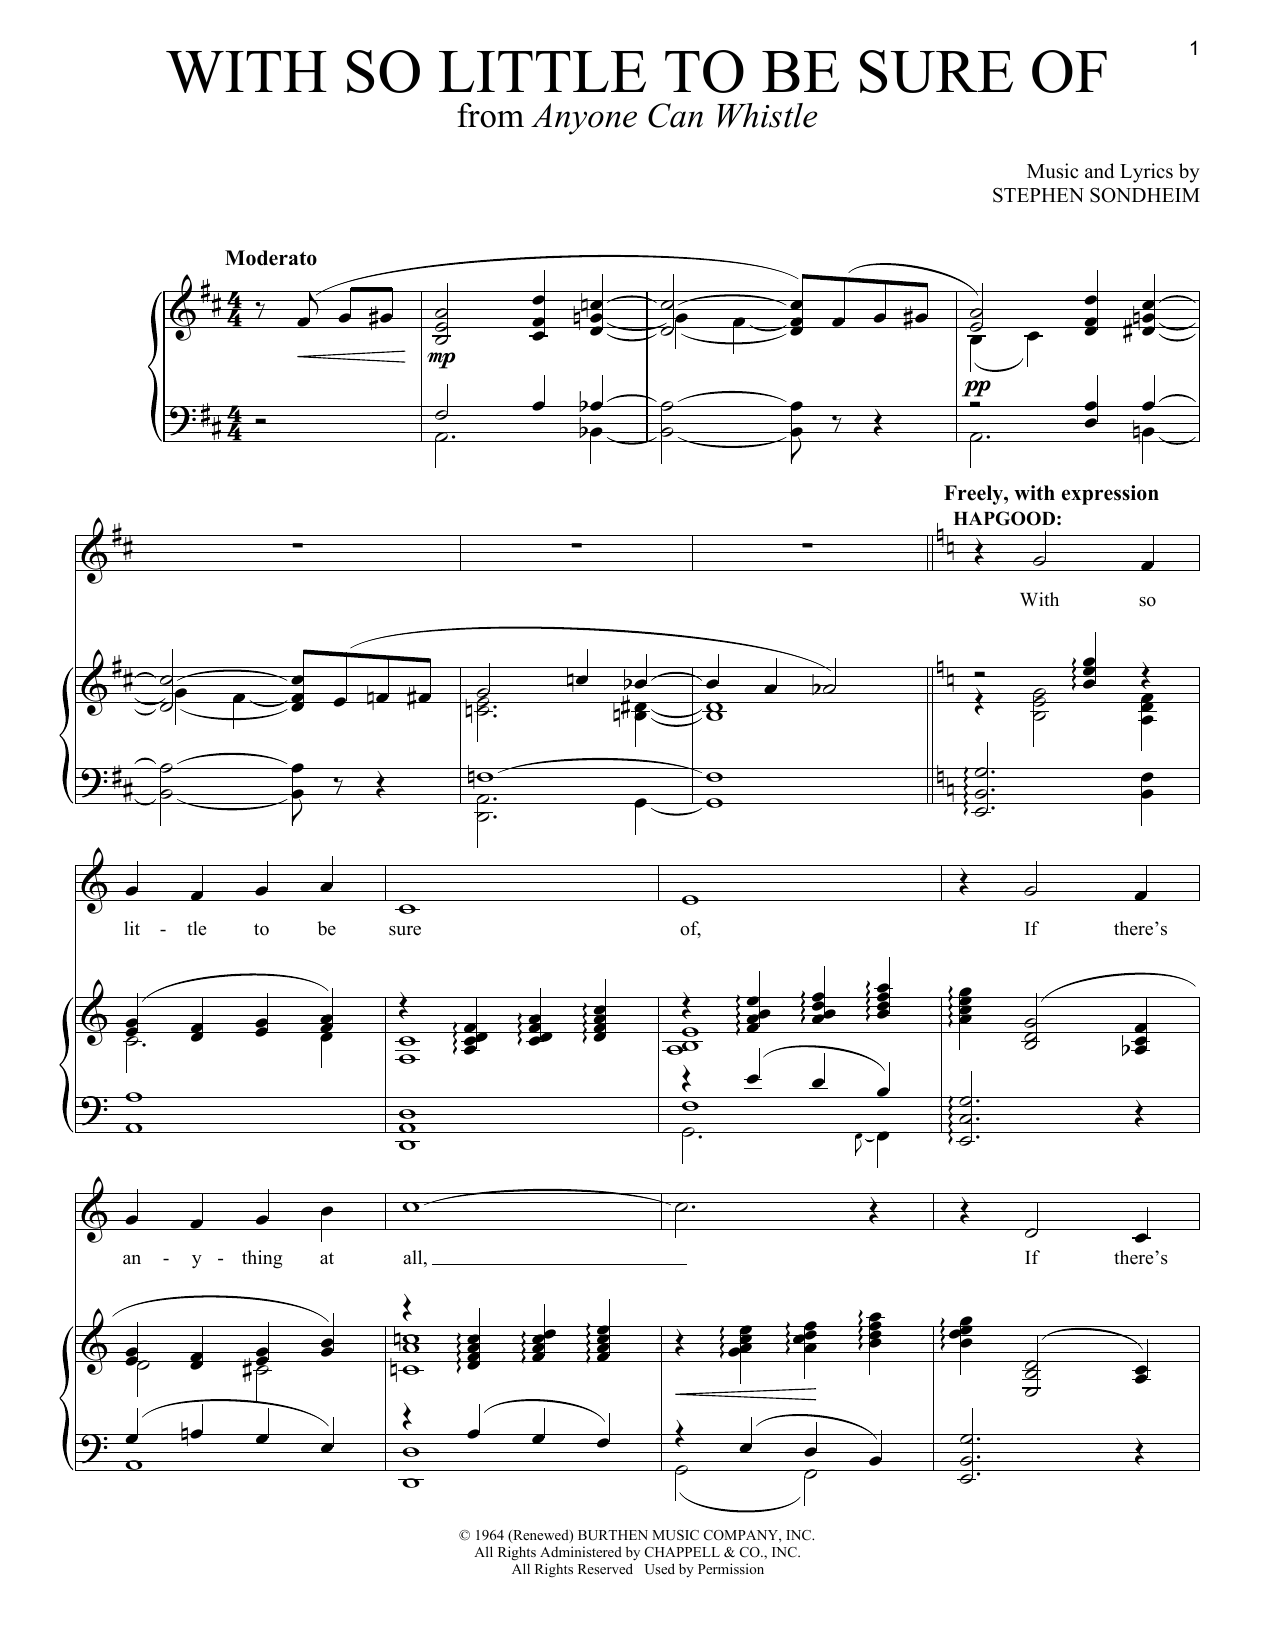 Download Stephen Sondheim With So Little To Be Sure Of Sheet Music